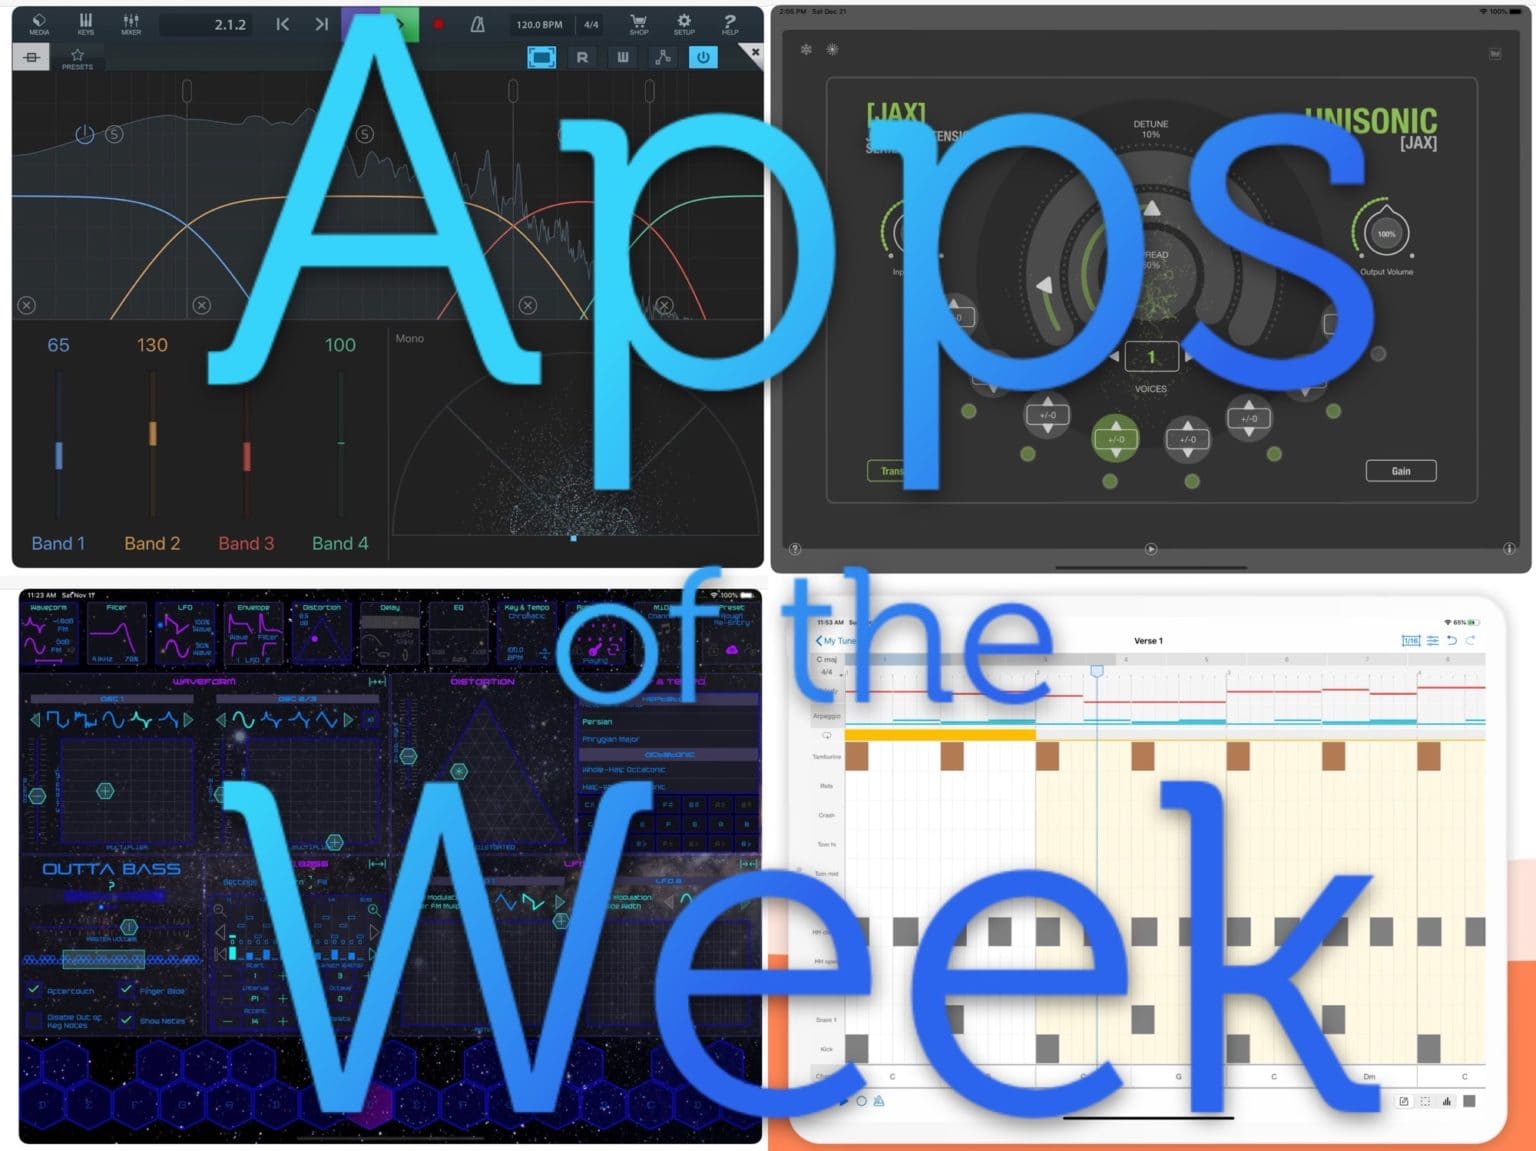 Yes, more music apps again this week.